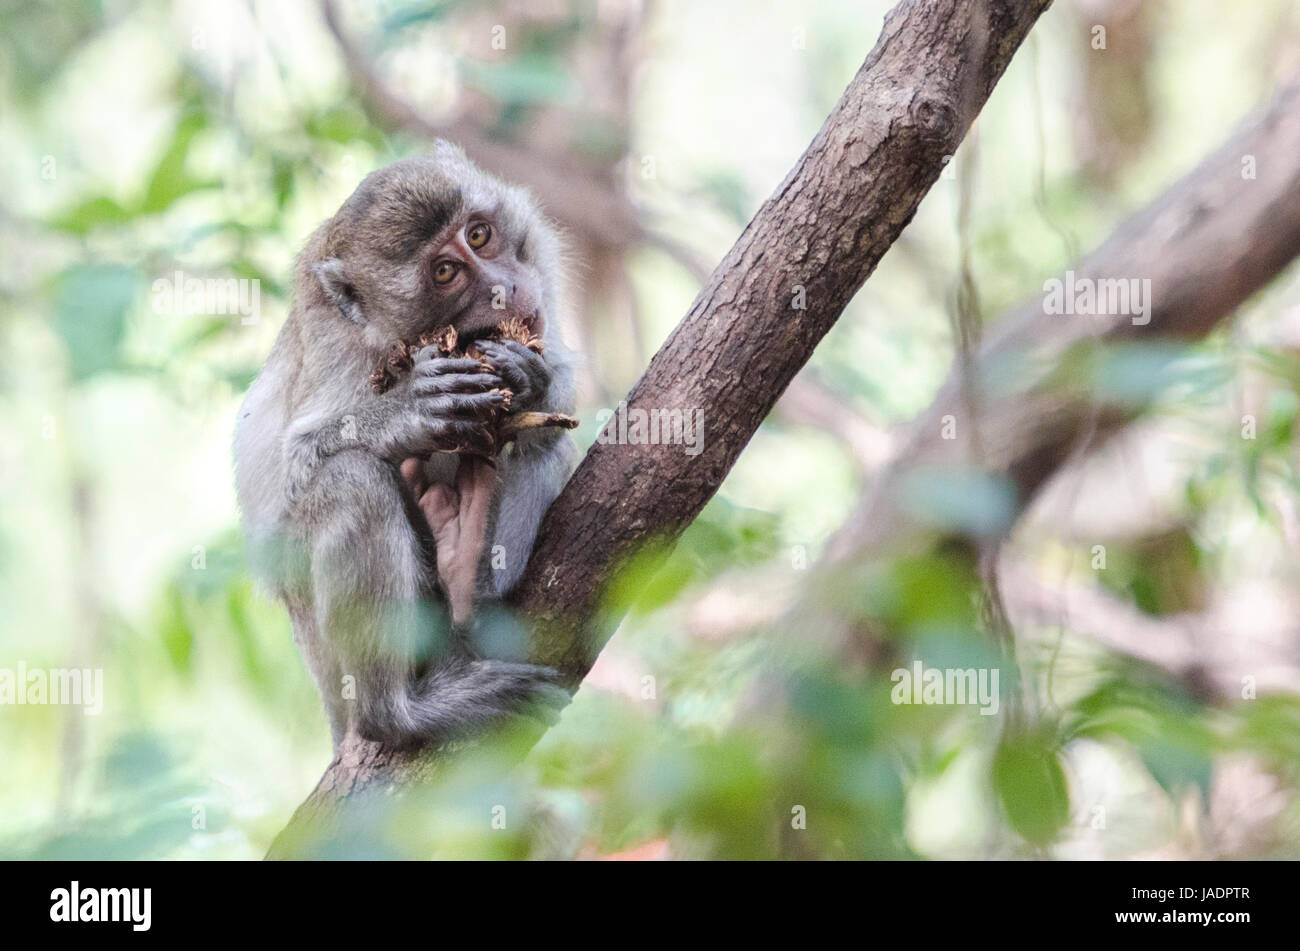 Young crab-eating macaque (Macaca fascicularis) or long-tailed macaque feeding on bananas while sitting on a tree in Thailand Stock Photo